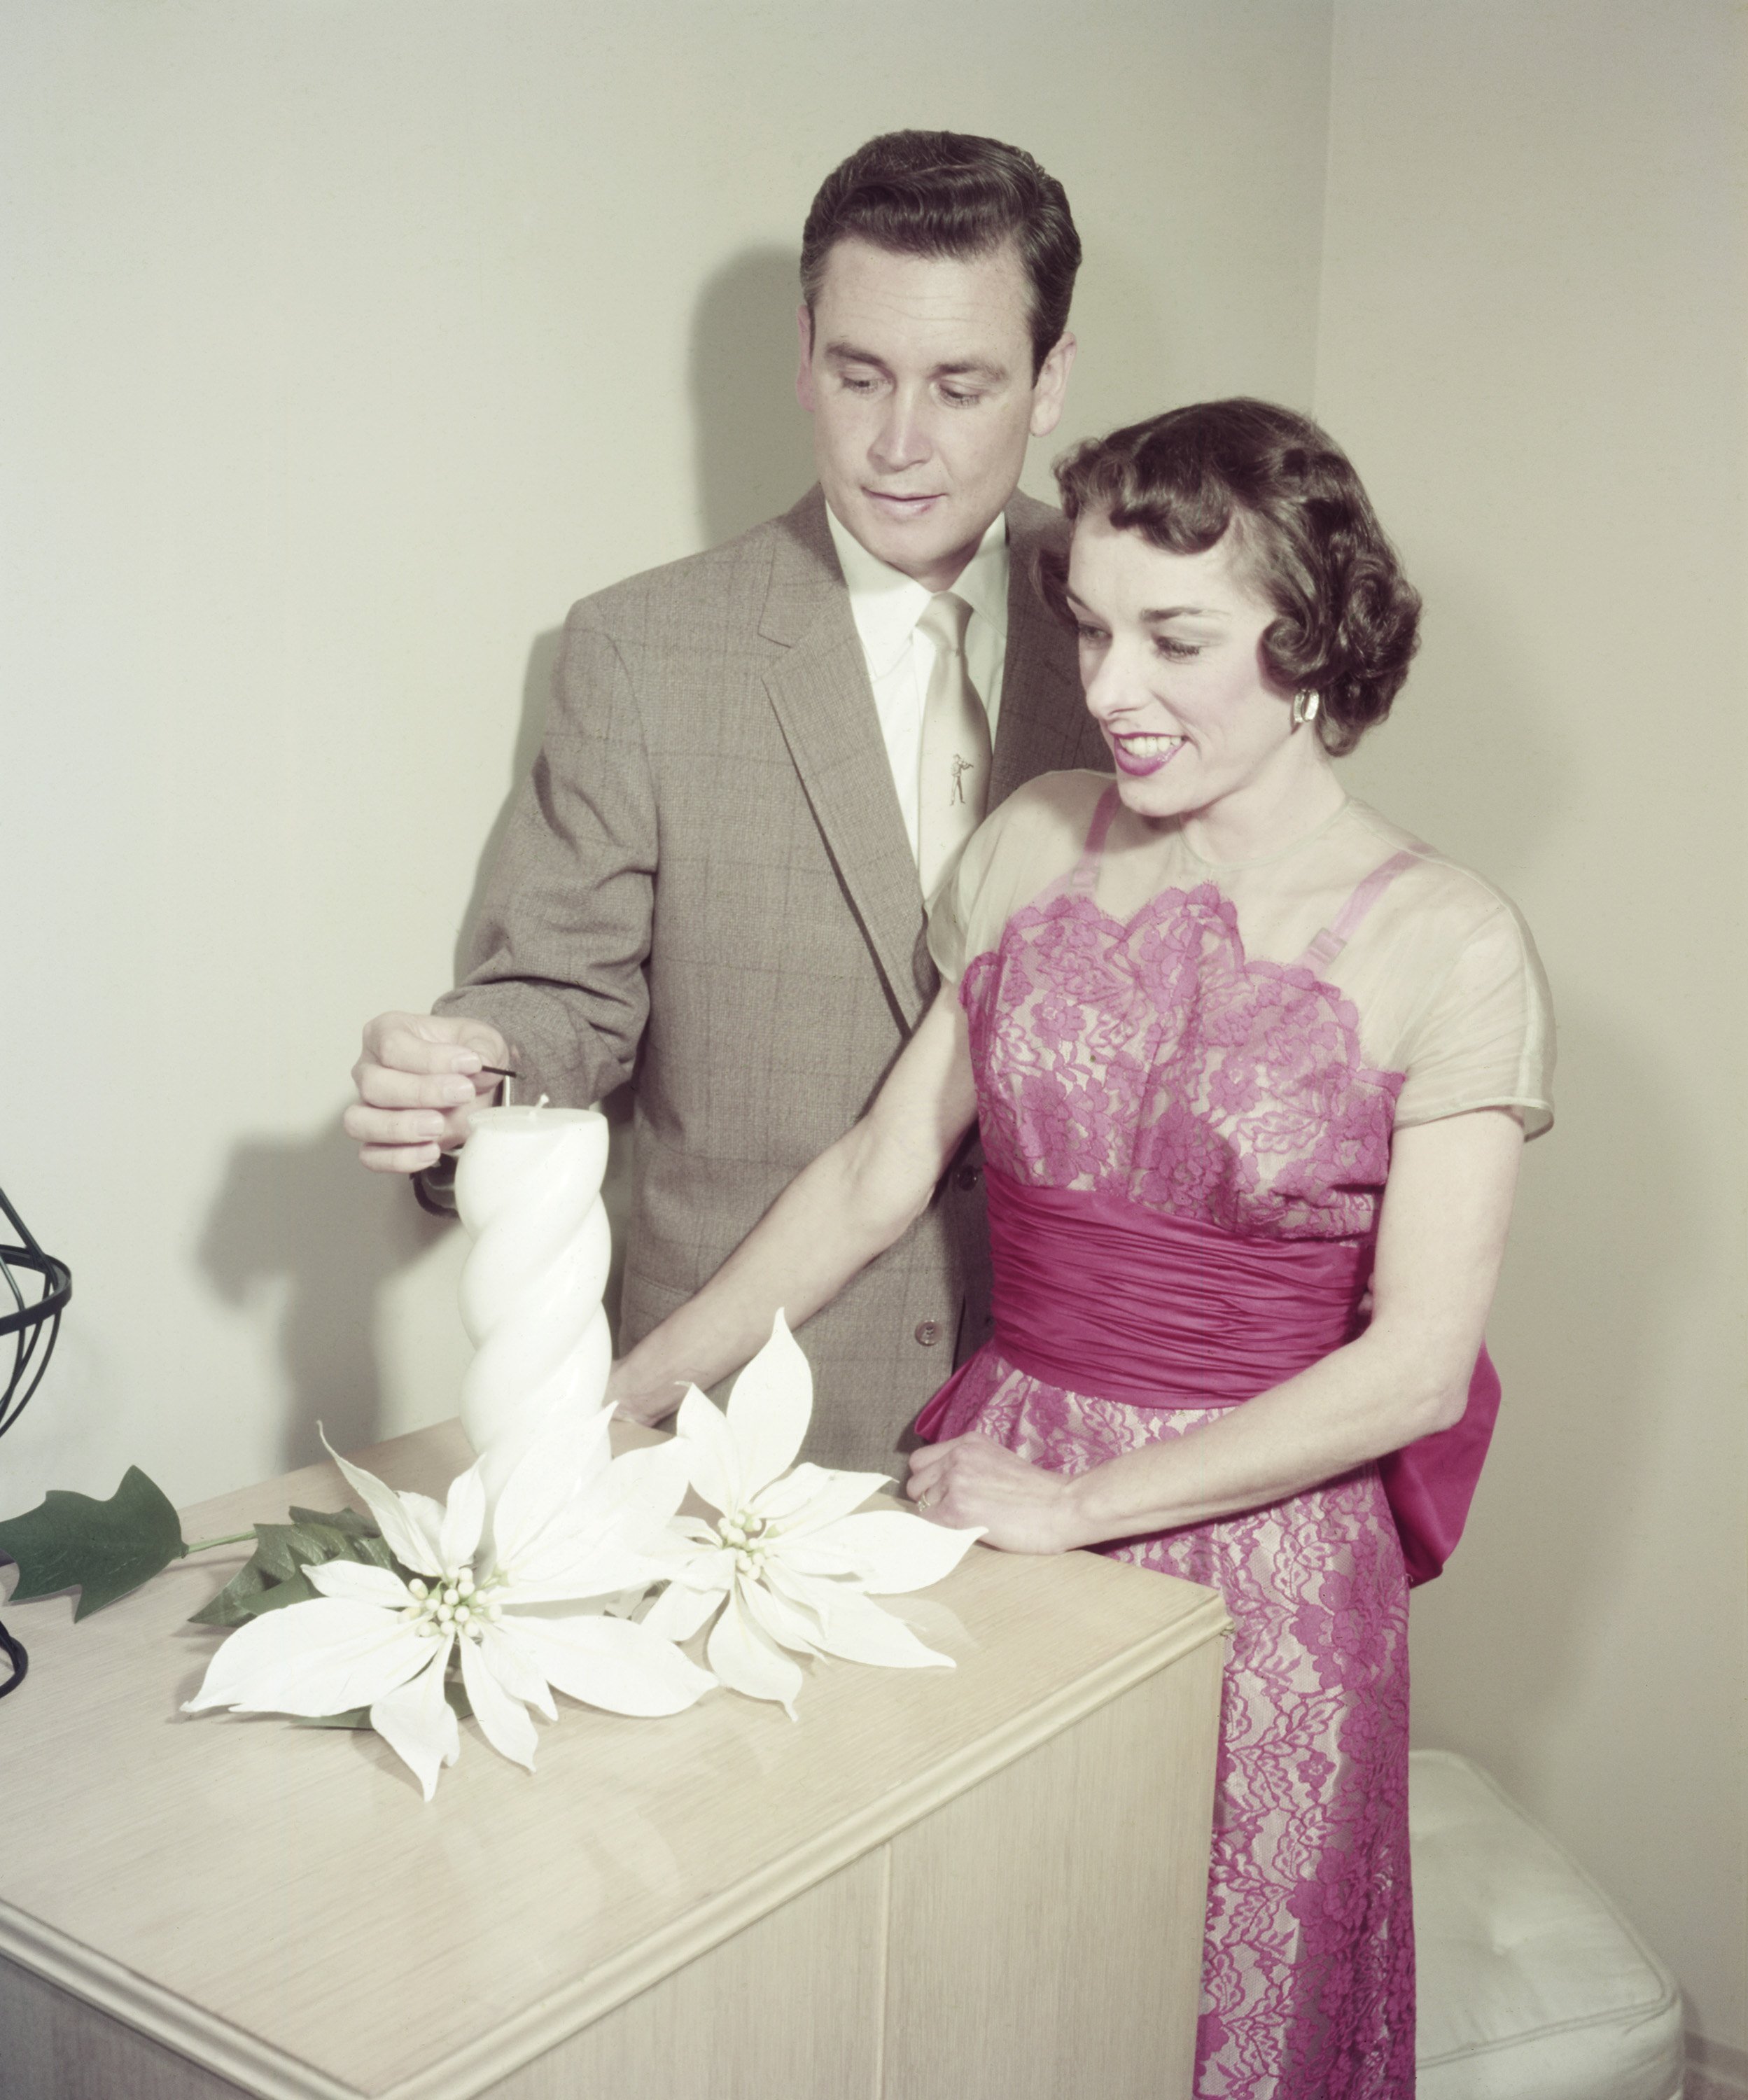 Bob Barker and his wife Dorothy Jo Barker look cute together while lighting a candle. | Source: Getty Images